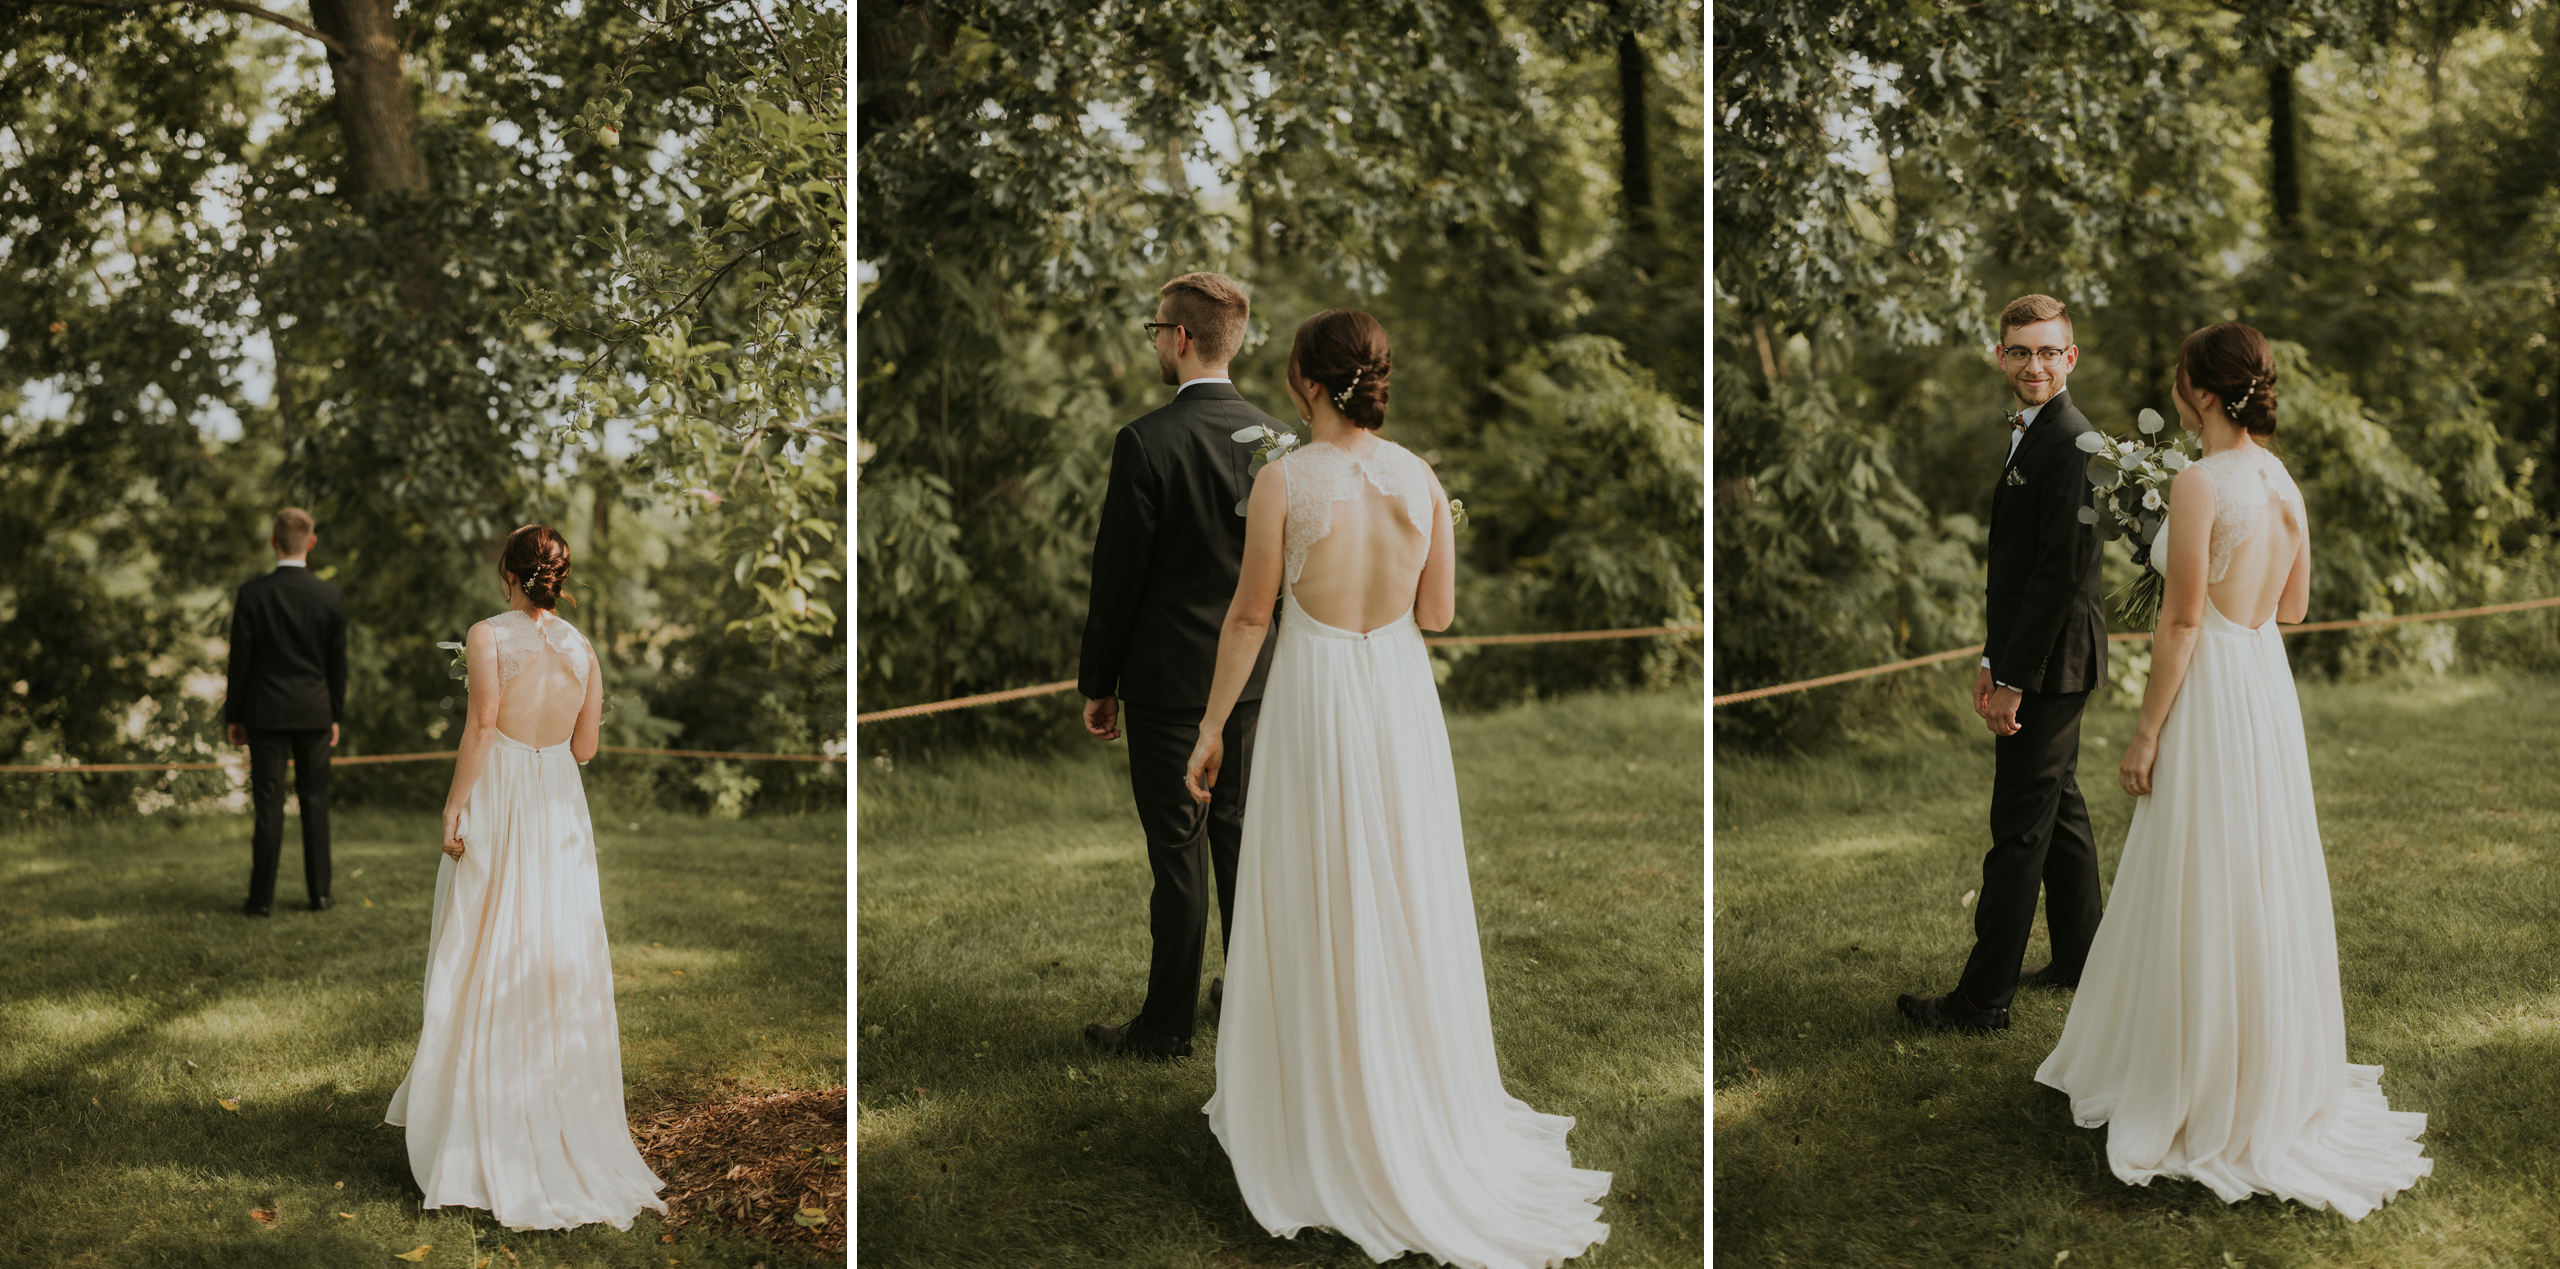 first look orchard vineland wedding bride groom afterglow images